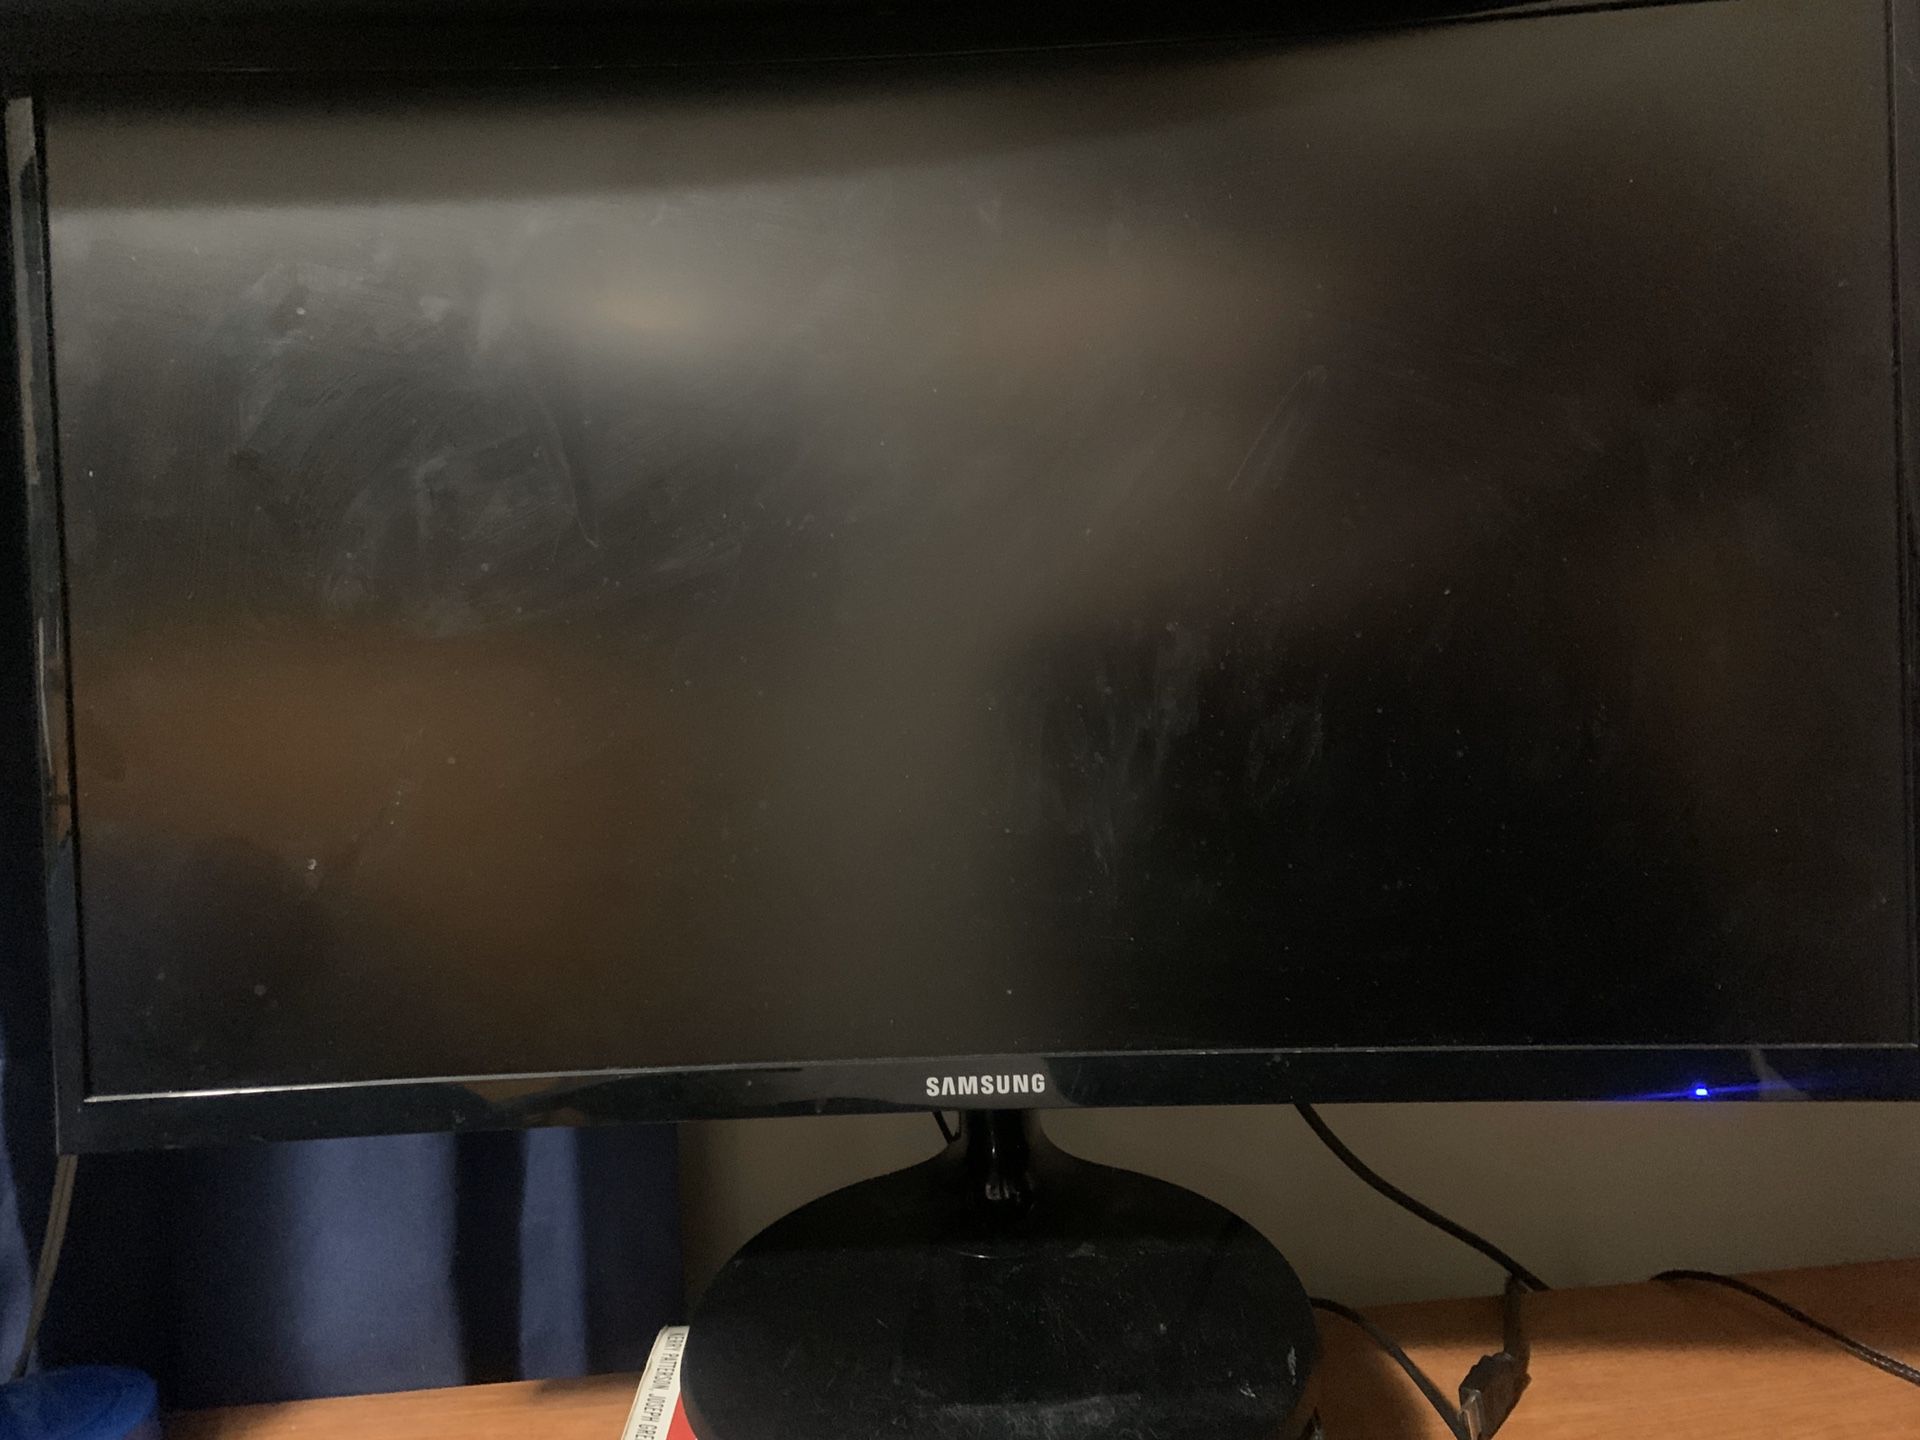 Samsung 27 Inch Curved LED Monitor